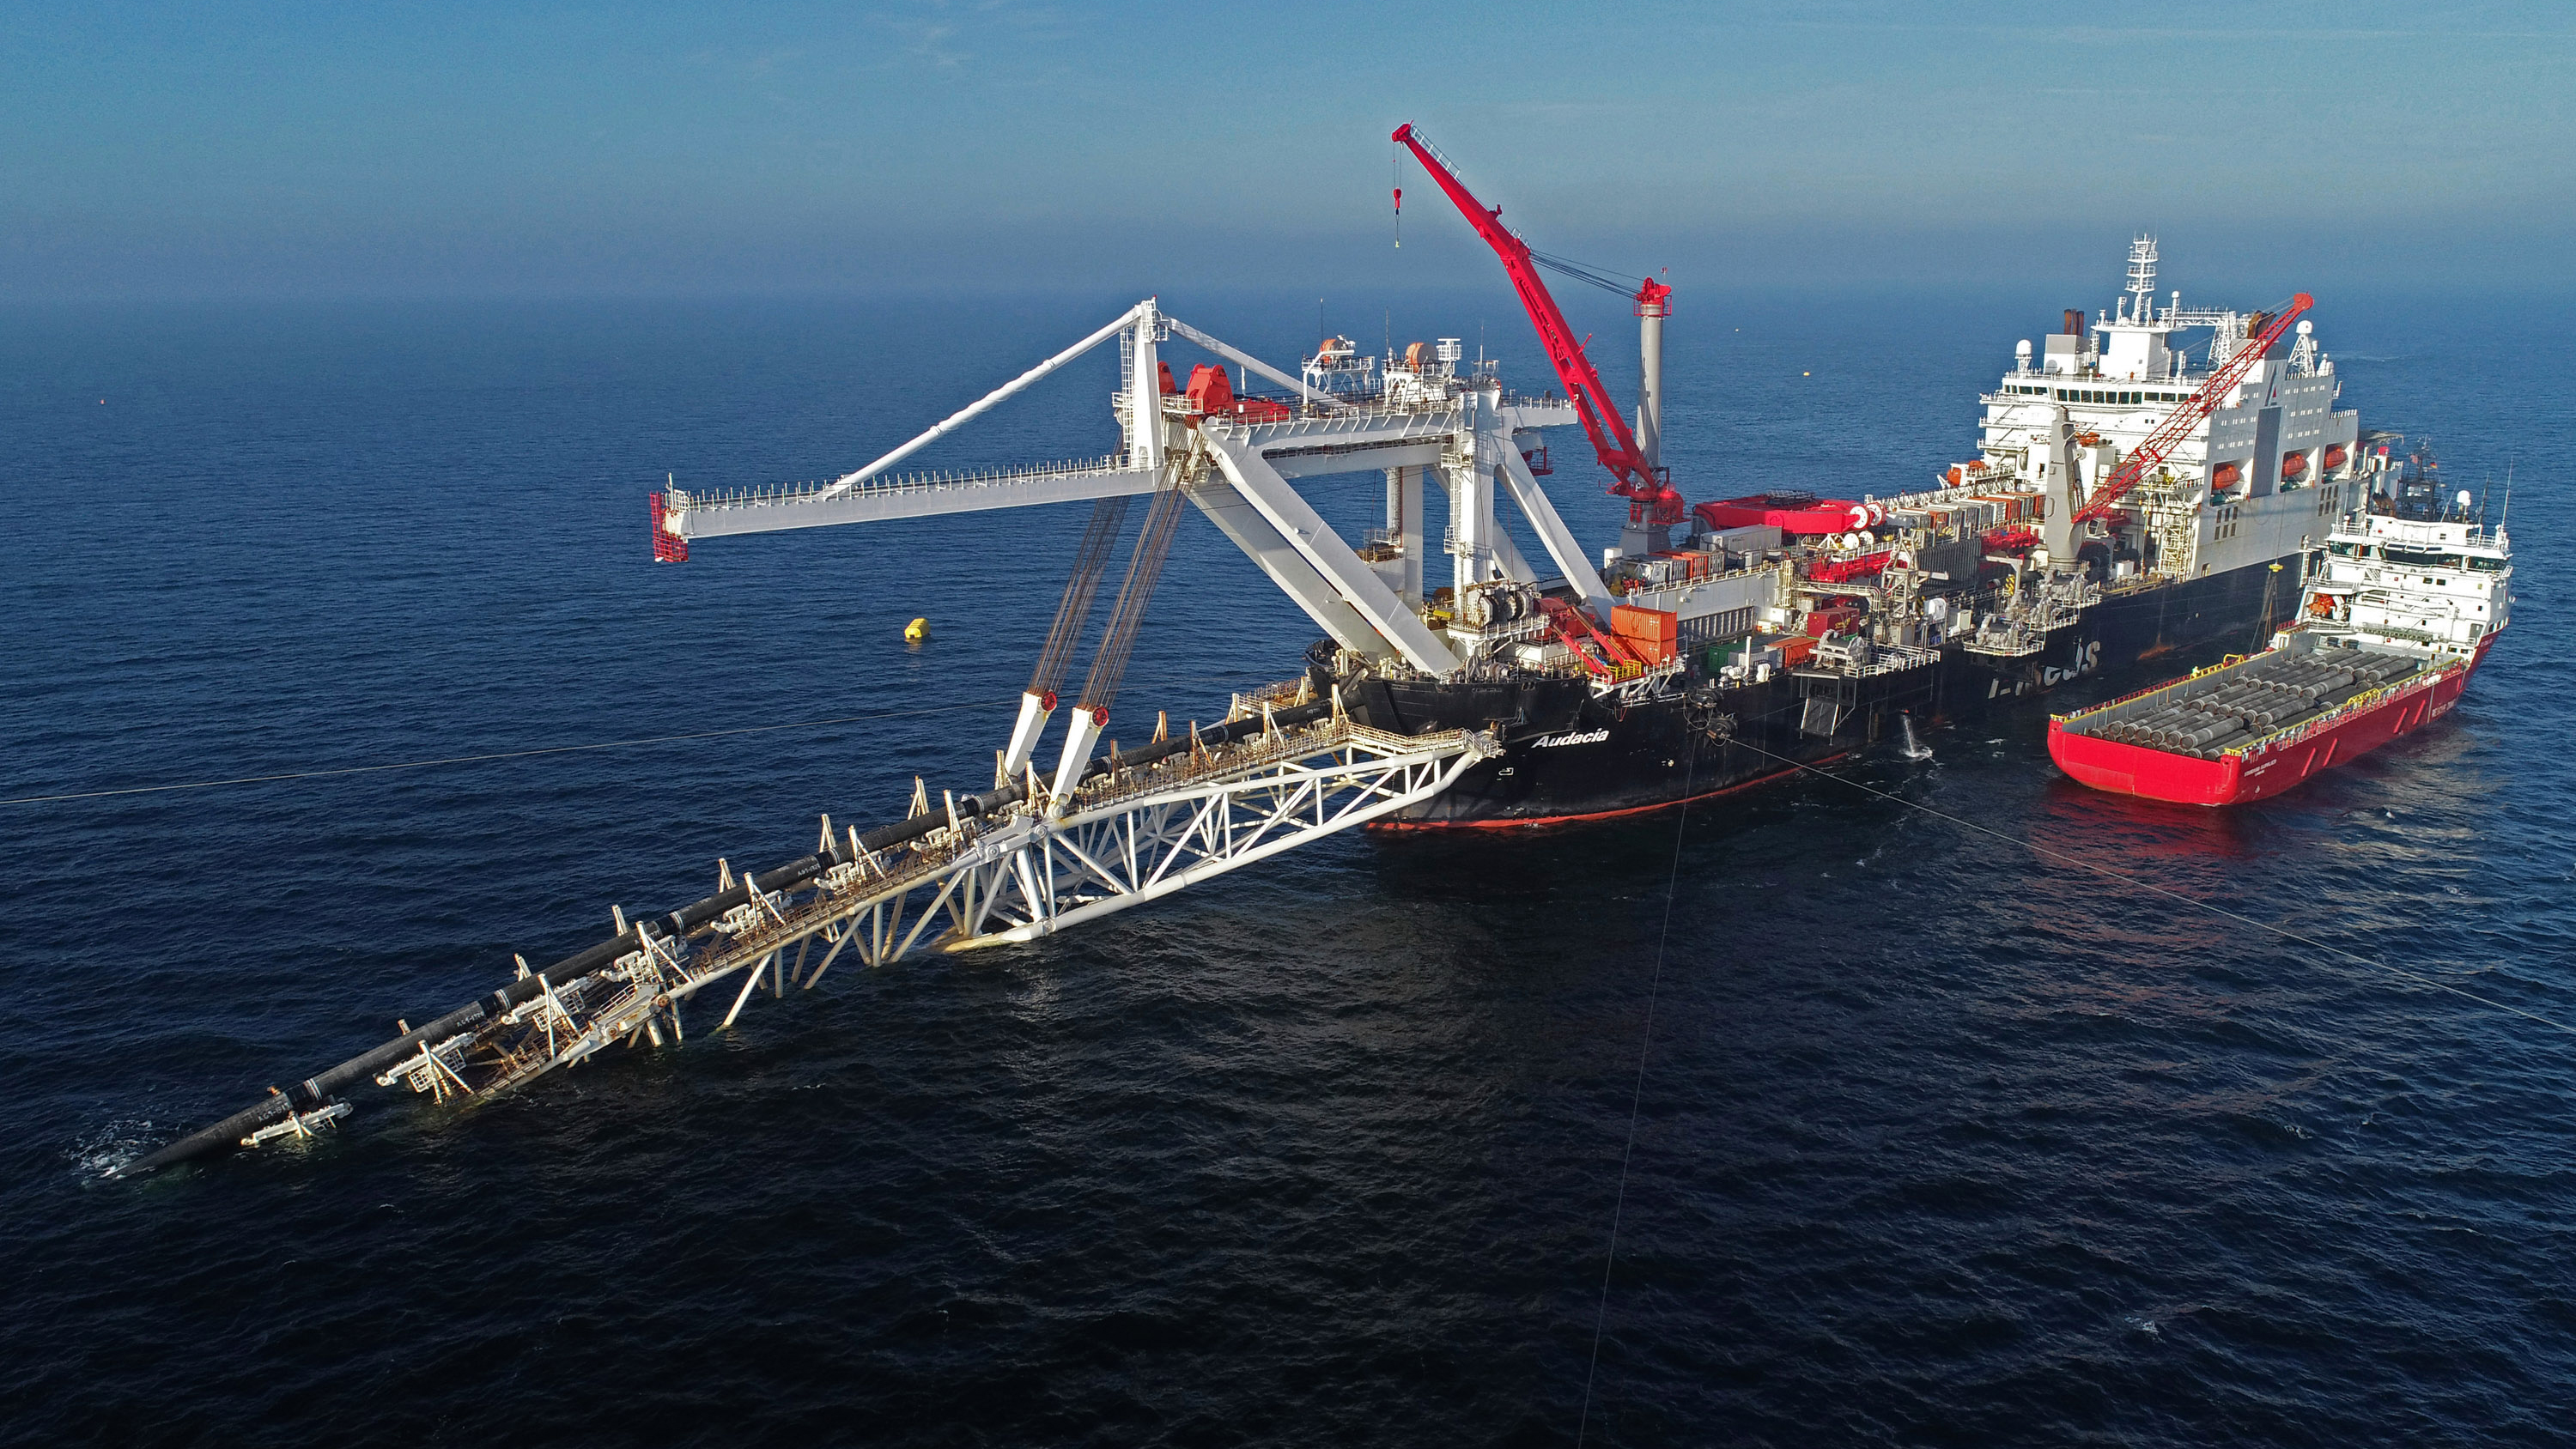 A ship at sea with cranes lowers sections of pipe into the water